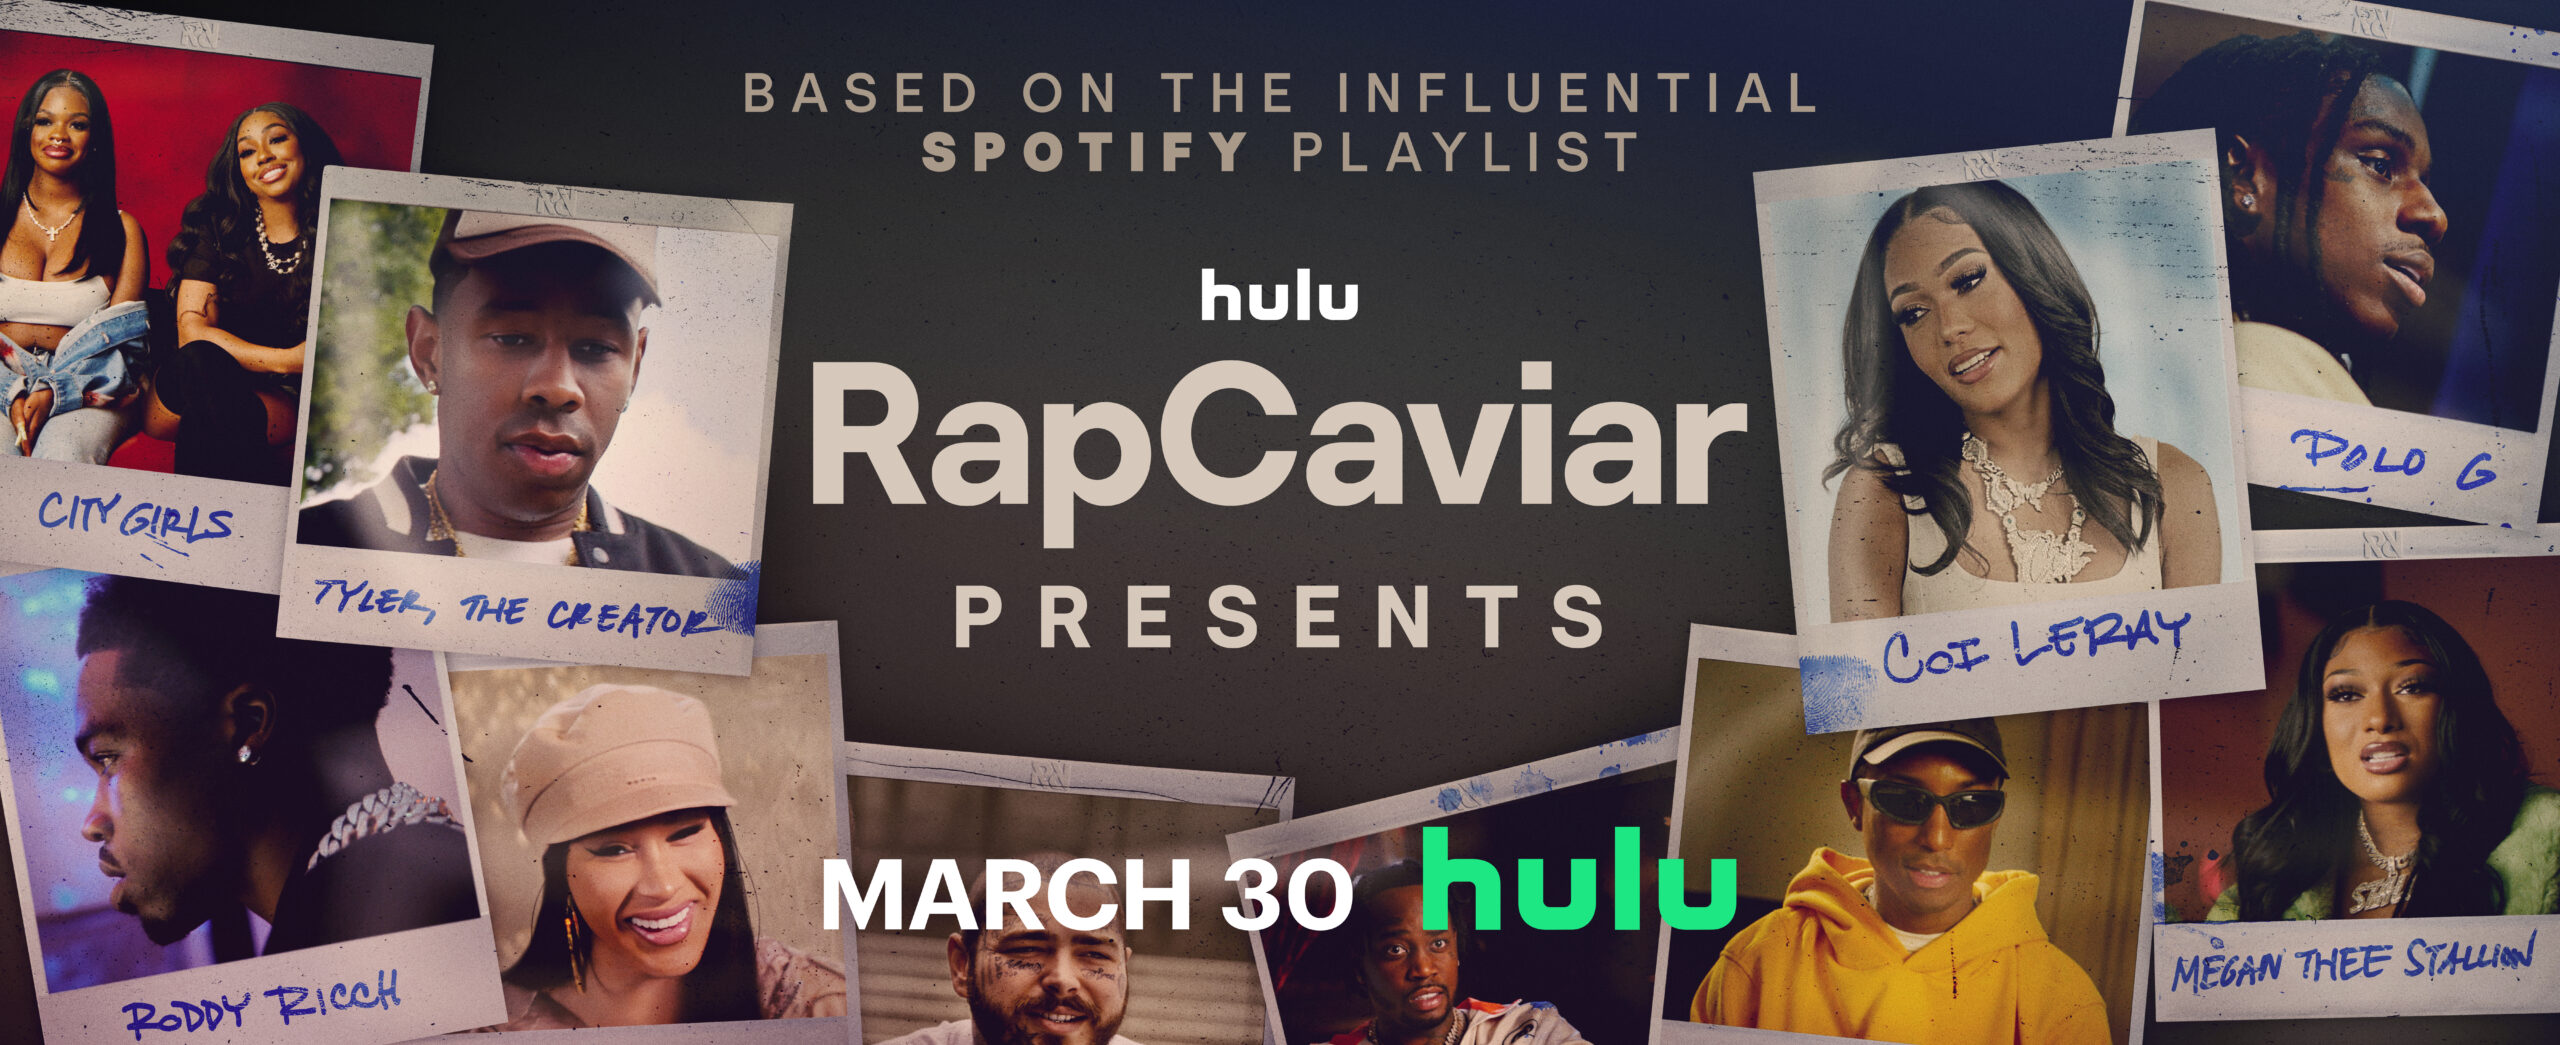 <strong>Hulu And Spotify Team Up For RapCaviar DocuSeries</strong>